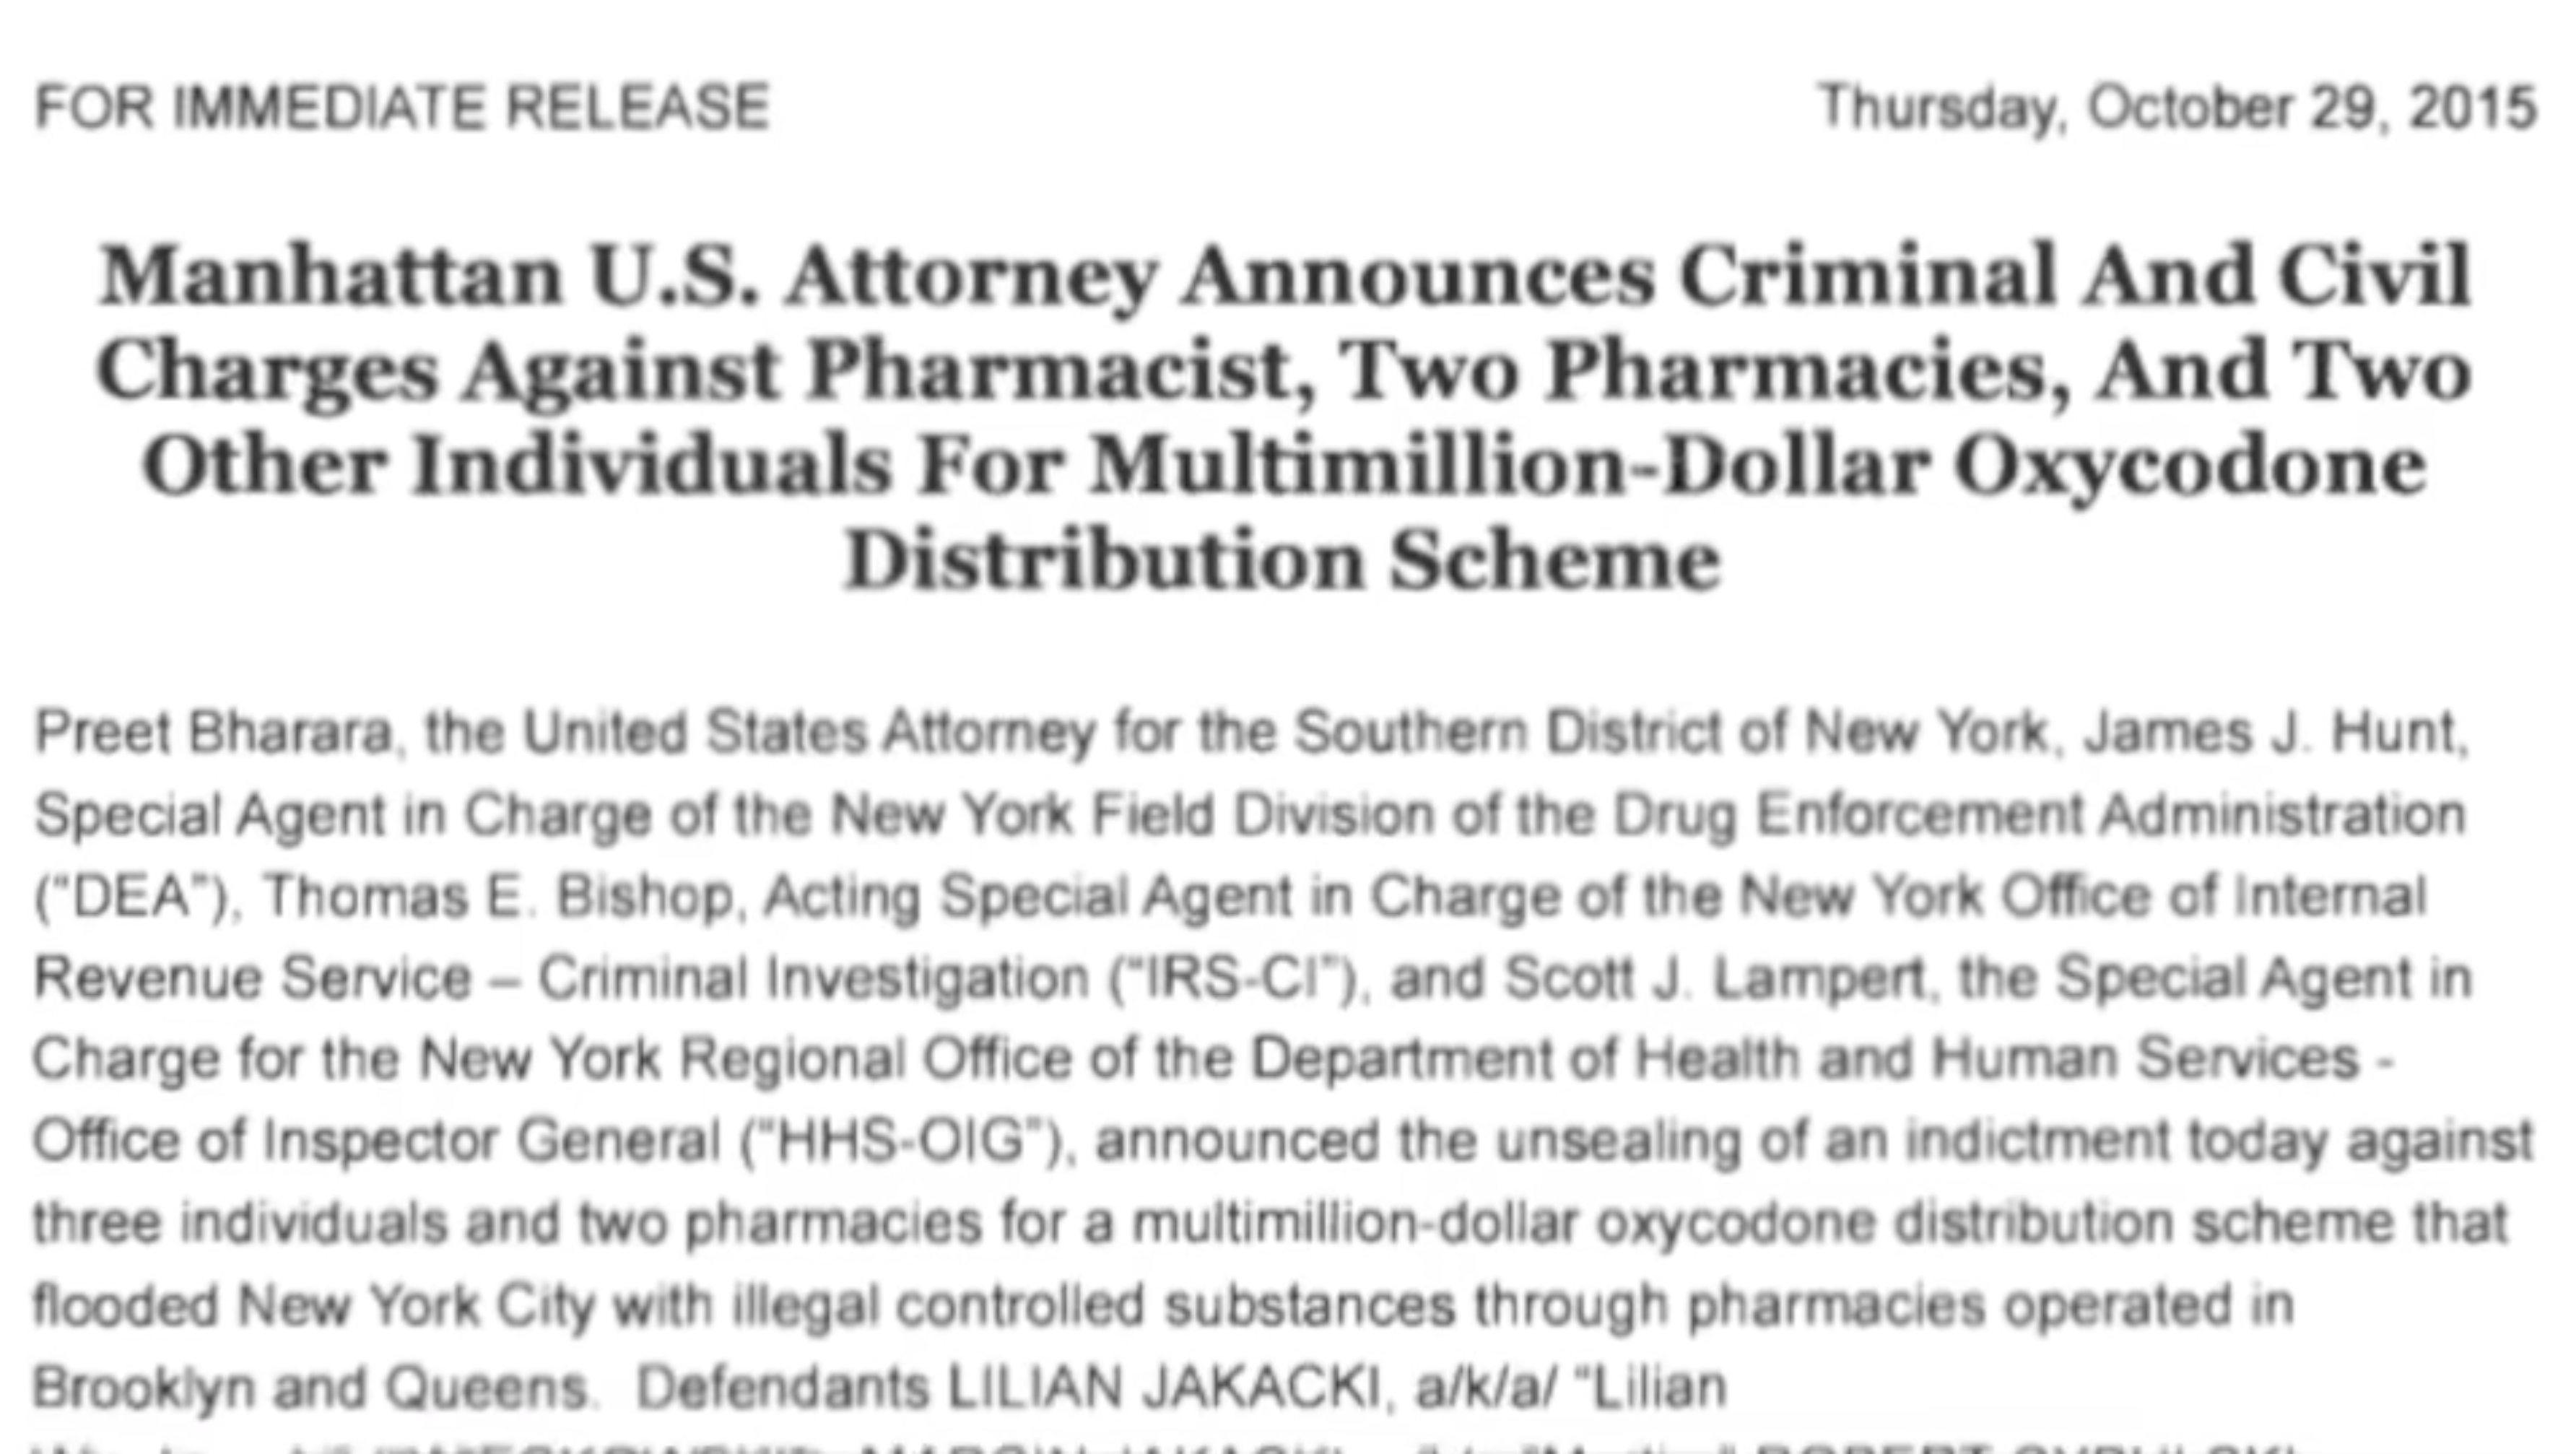 Manhattan US attorney announces criminal and civil charges against pharmacist, two pharmacies, and two other individuals for multimillion-dollas oxycodone distribution scheme